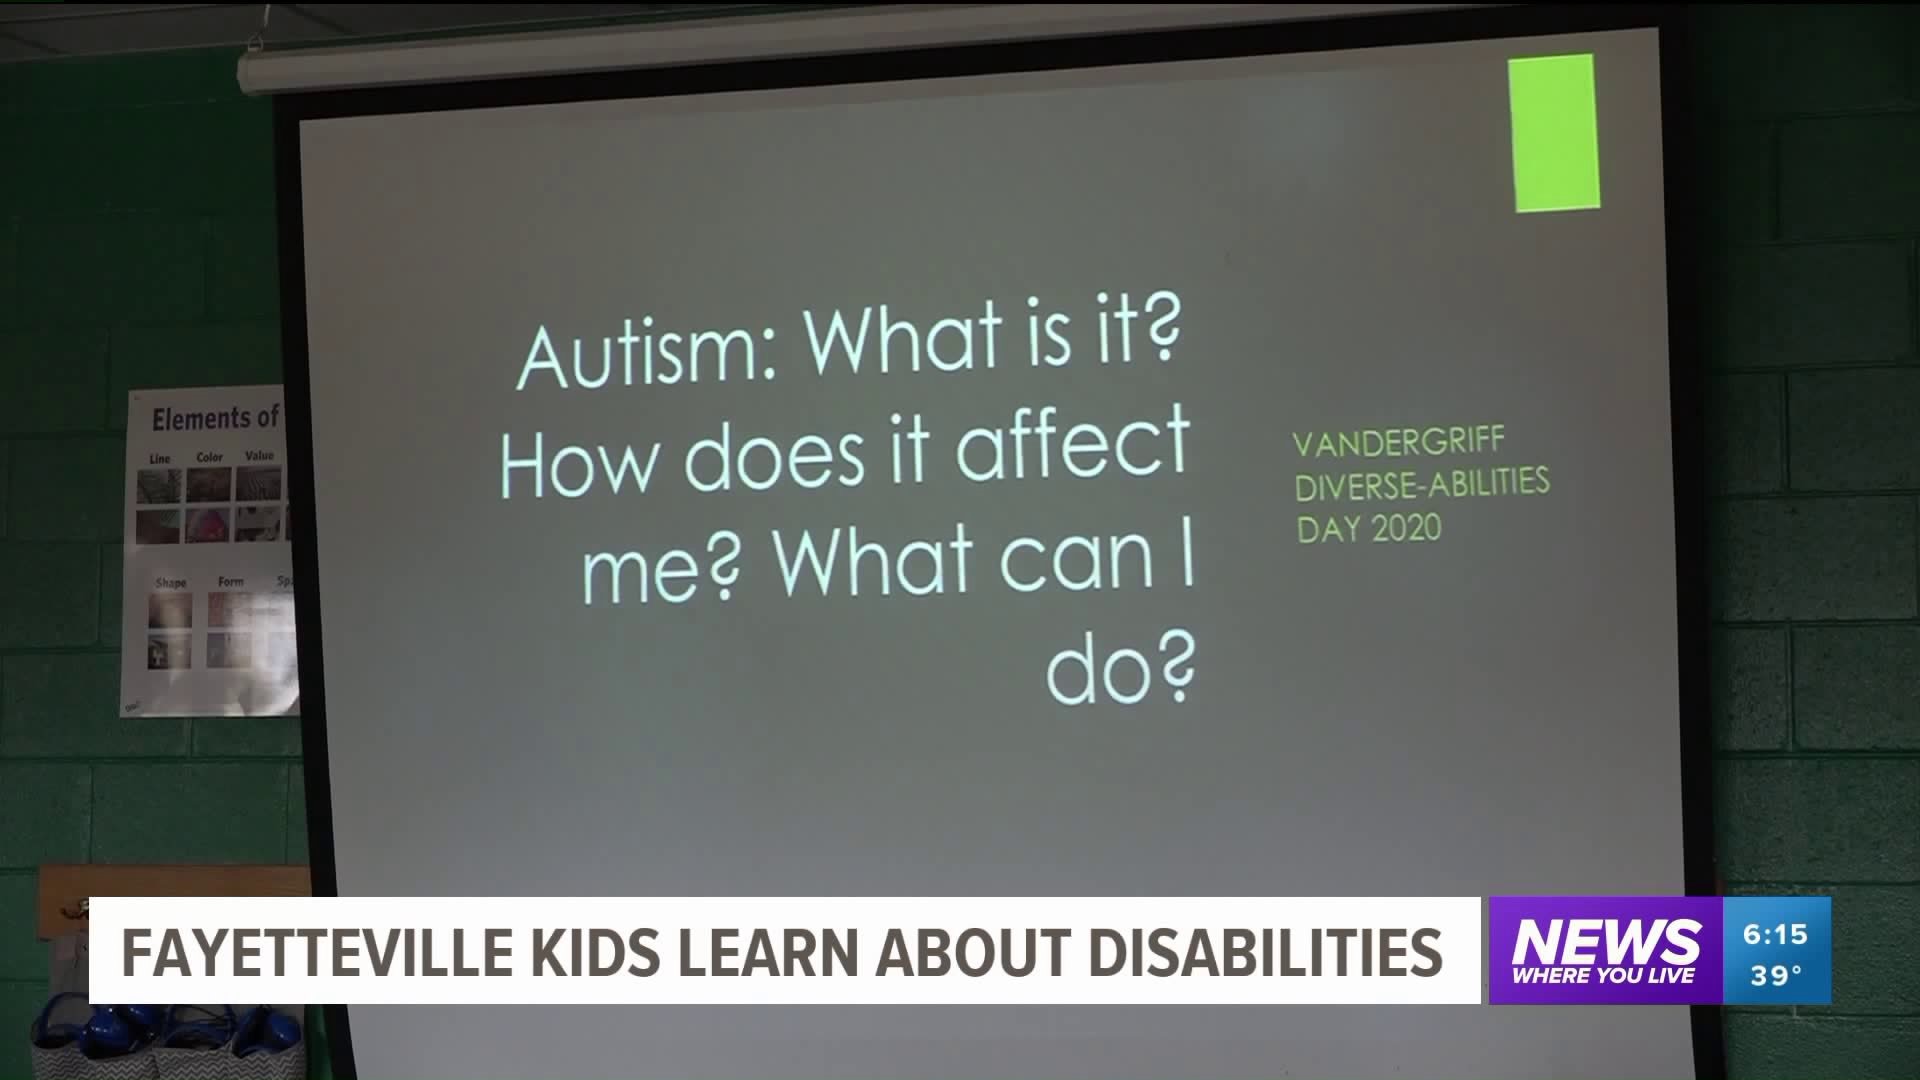 Fayetteville Kids Learn About Disabilities